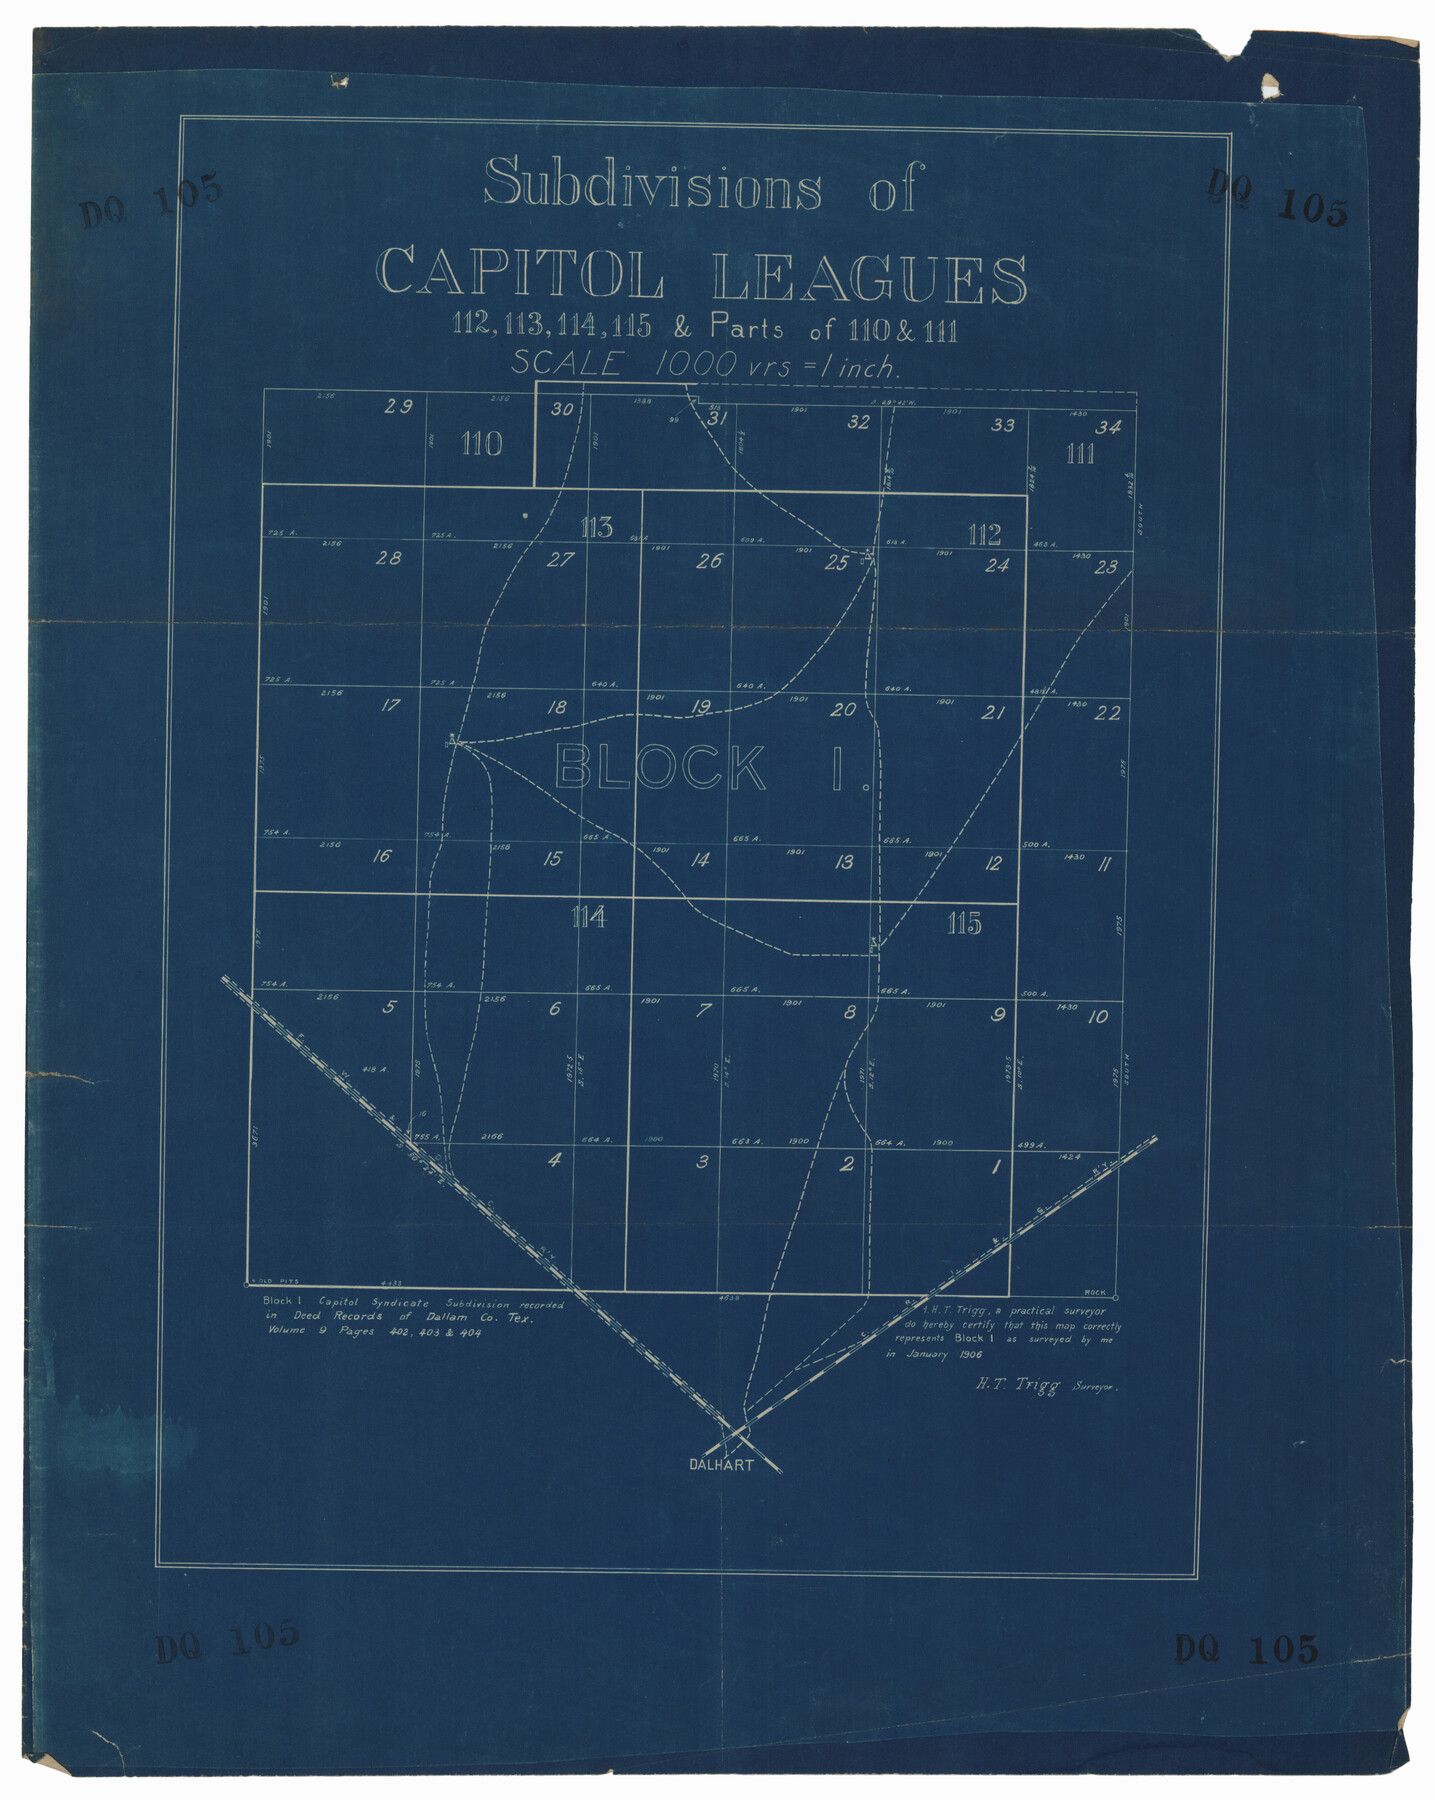 92583, Subdivision of Capitol Leagues 112, 113, 114, and 115, and Parts of 110, and 111, Twichell Survey Records